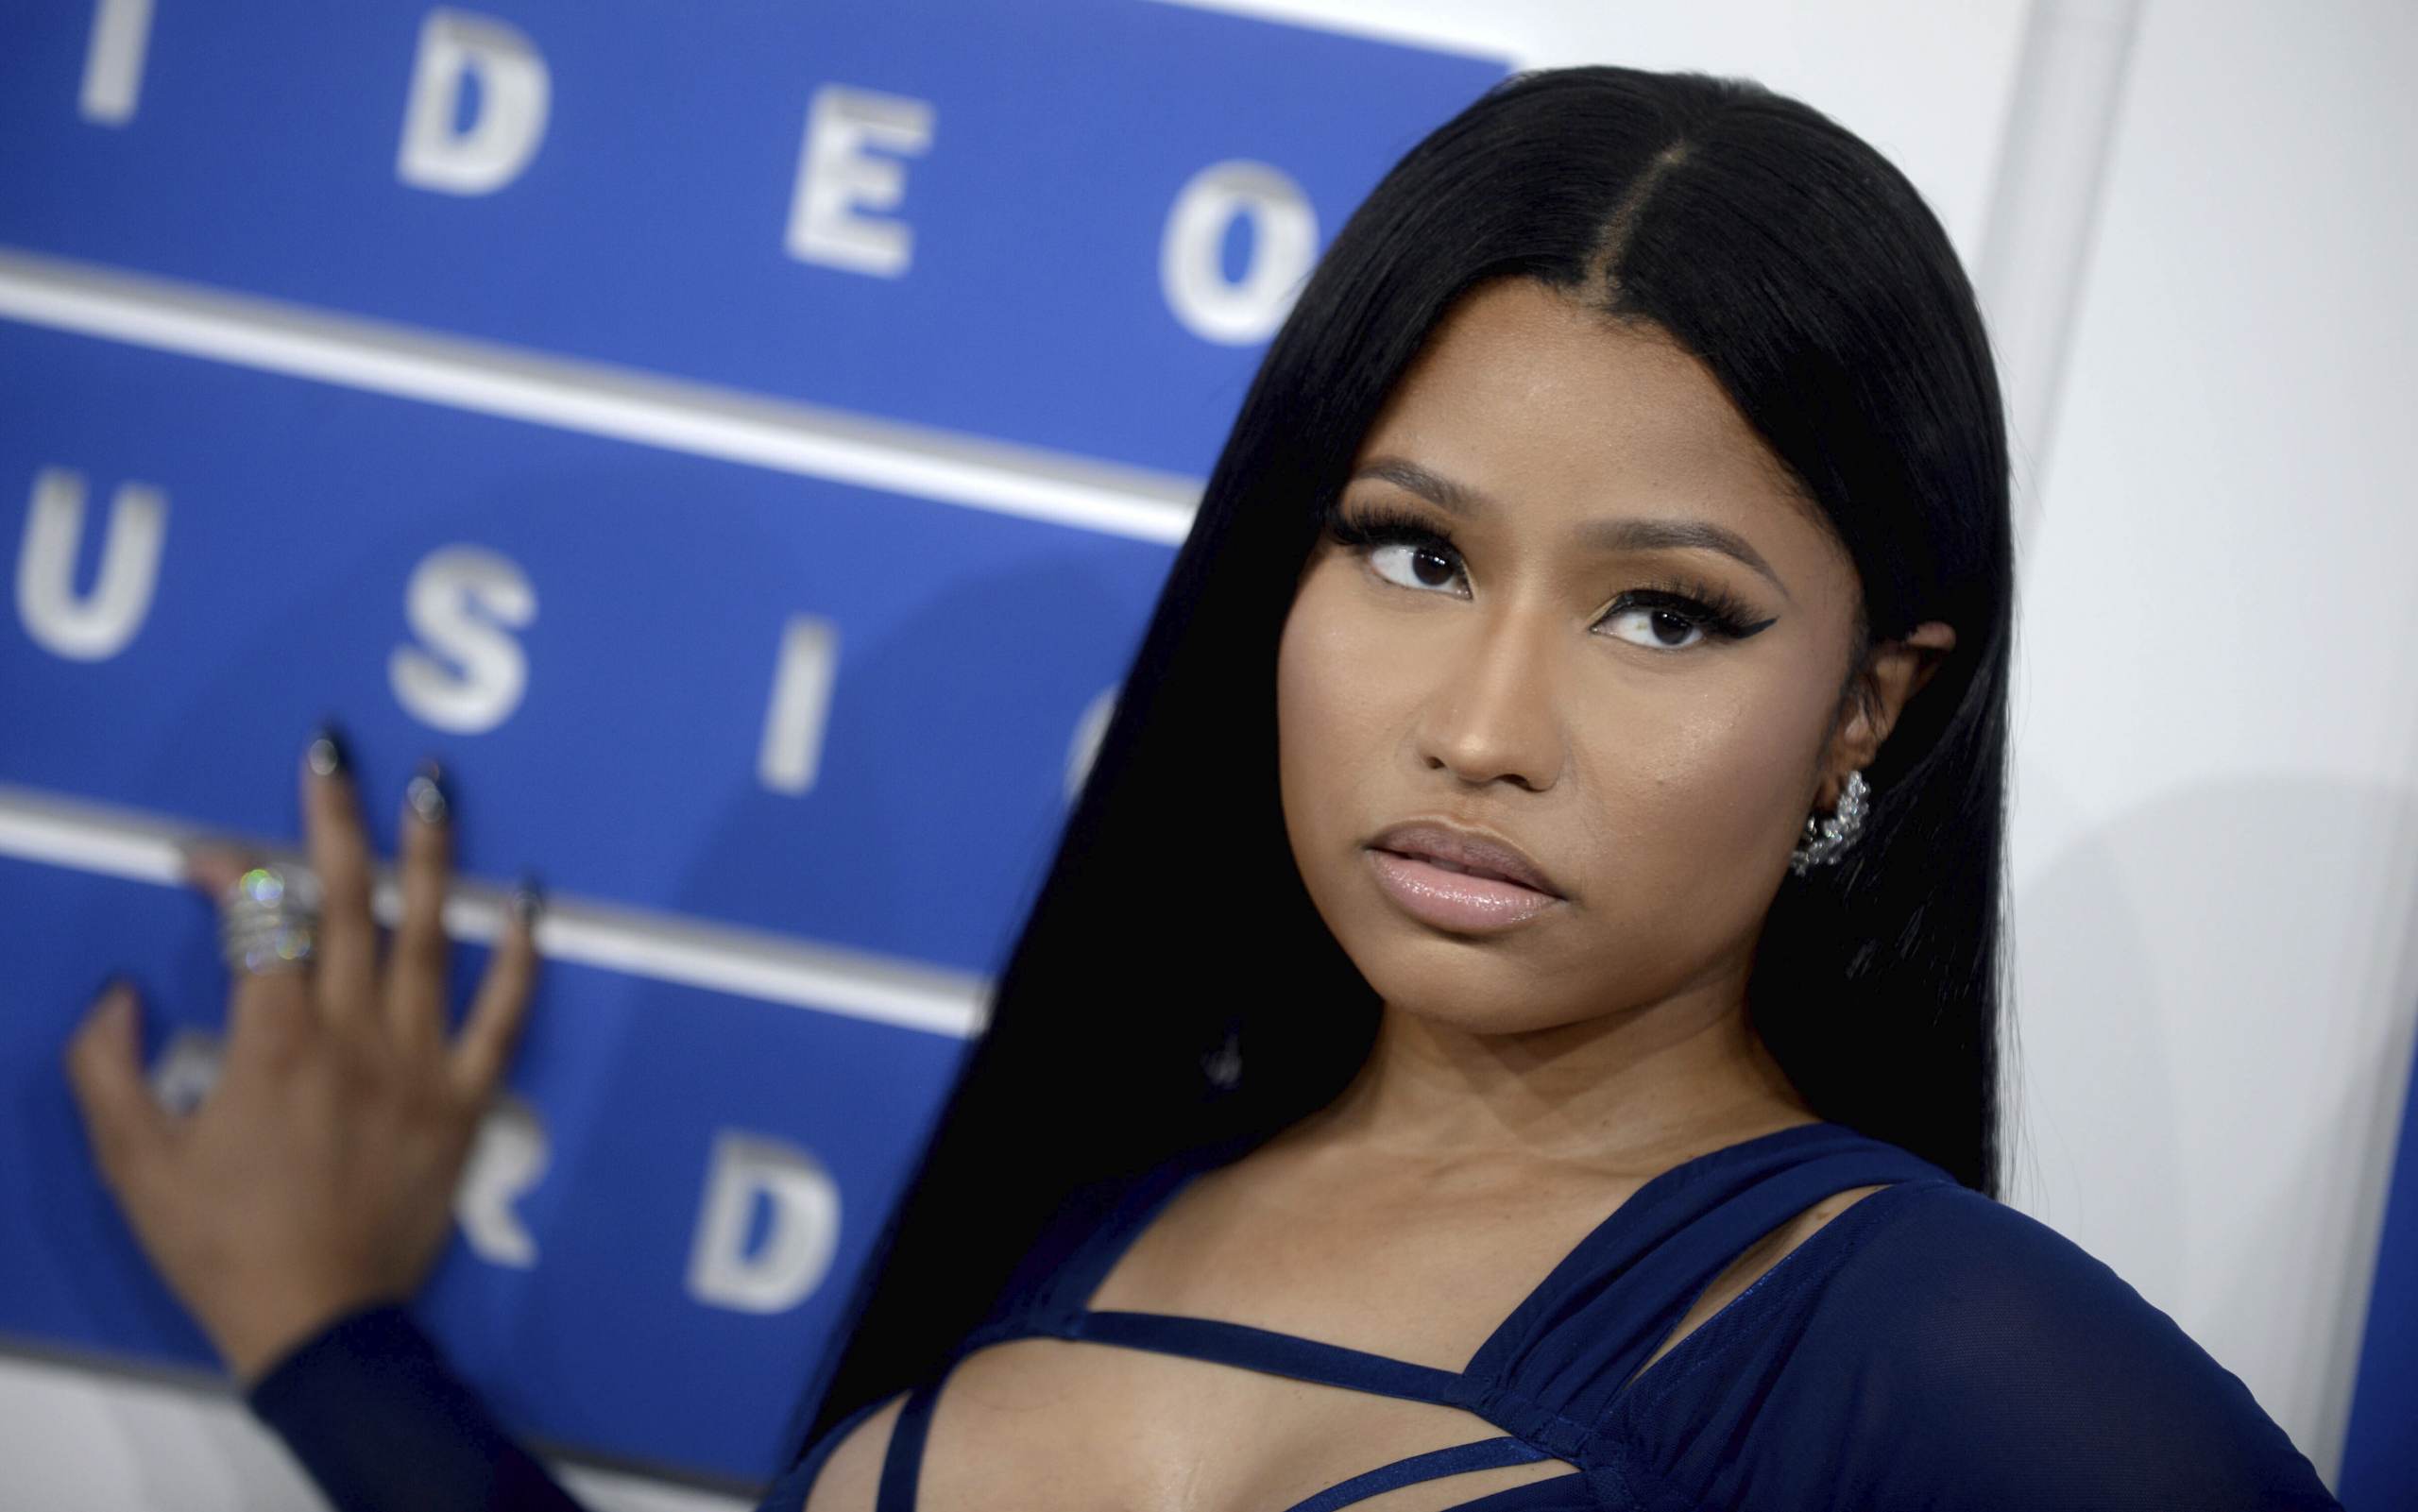  Nicki Minaj Says She Was Locked Out of Twitter Shortly After Sharing Tucker Carlson Clip (VIDEO)